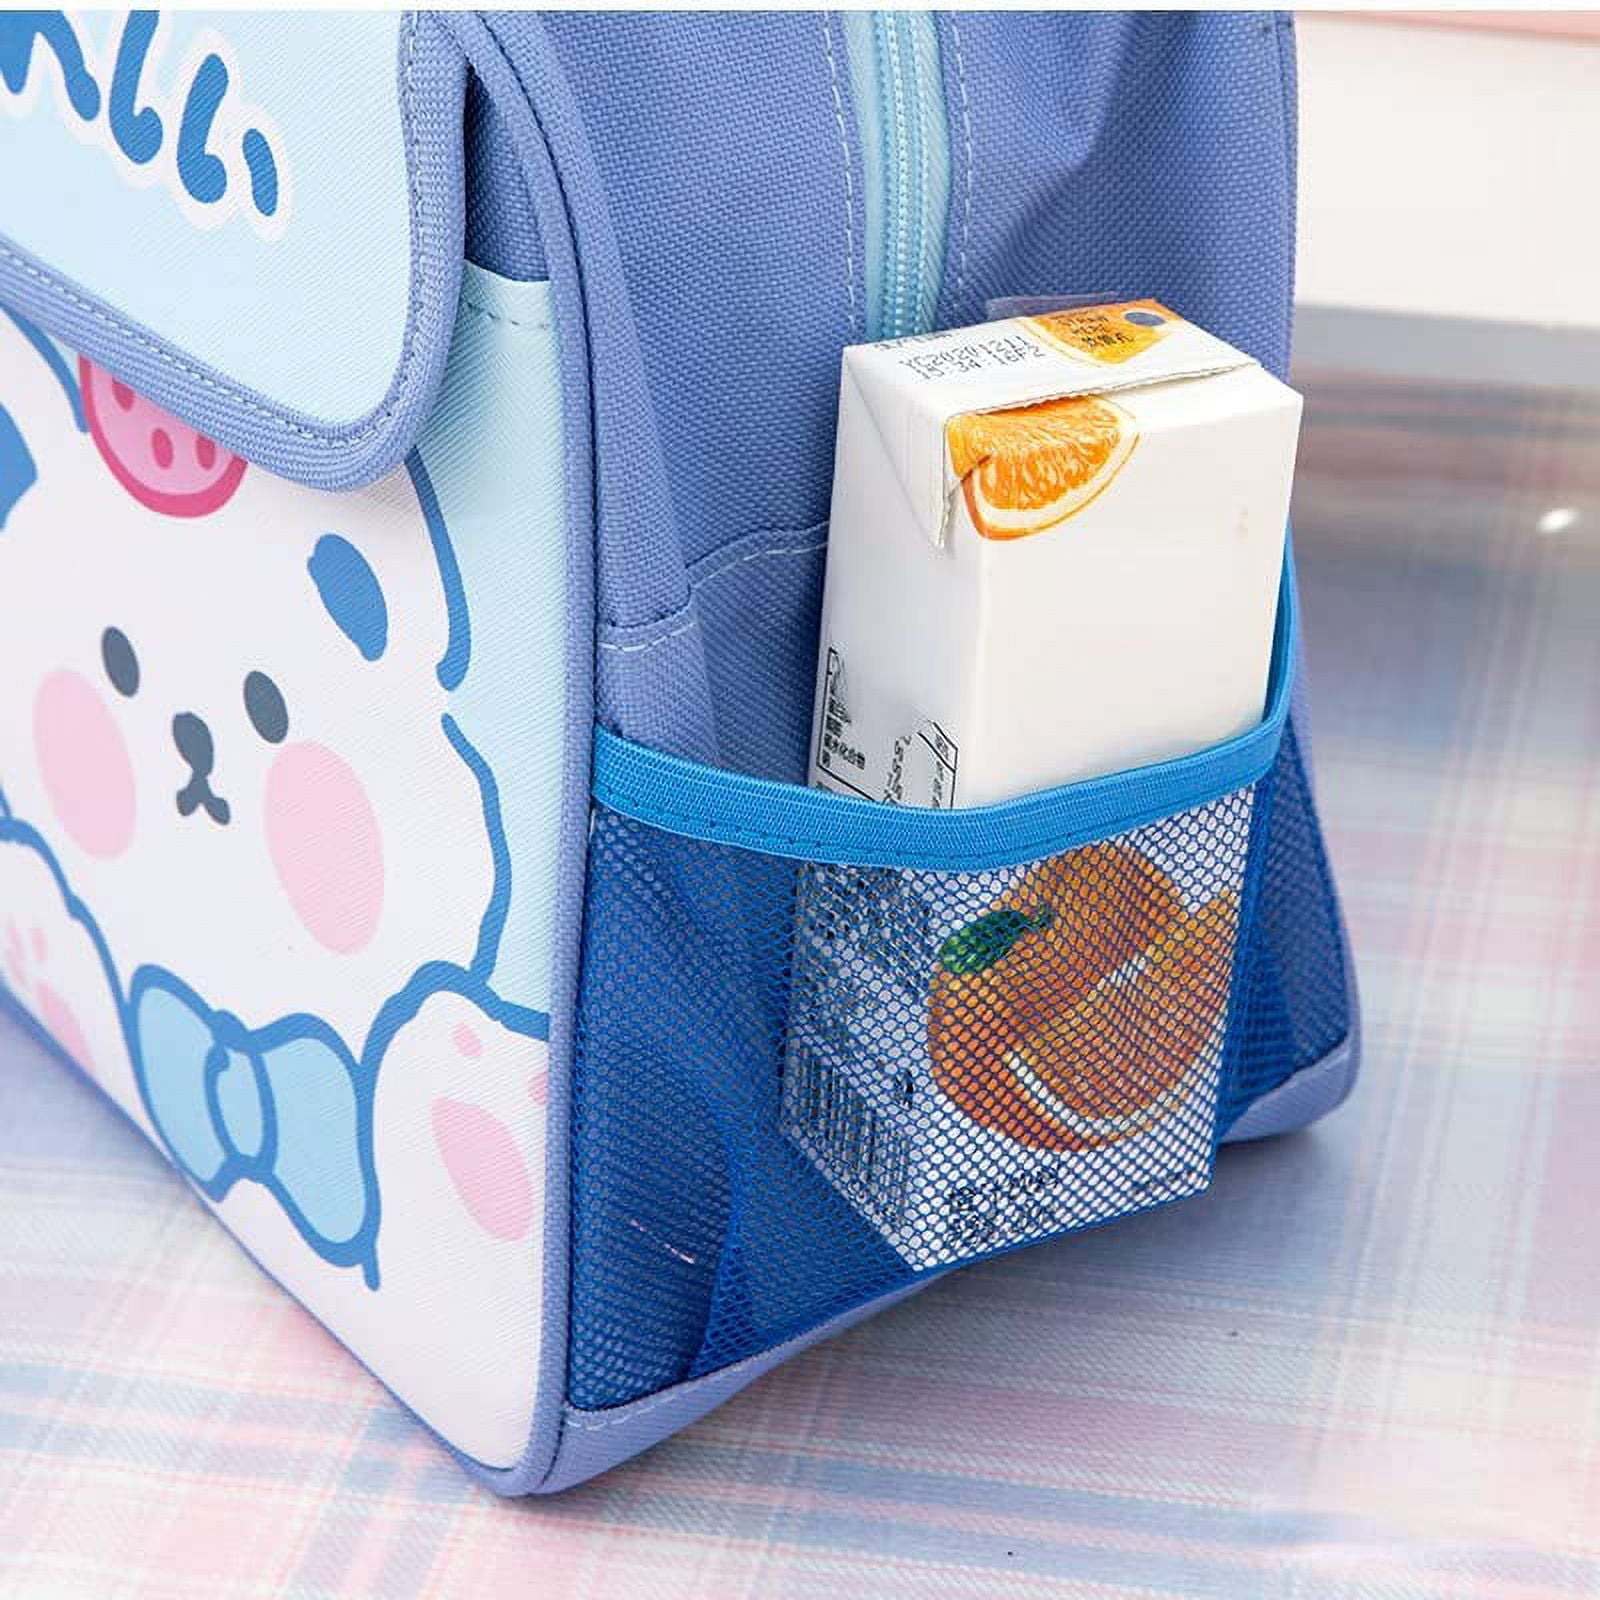 PAZKJCLCQ Anime Lunch Box Insulated Lunch Bag Pink Girl Portable Cartoon  Lunch Tote Cute For Boys Gi…See more PAZKJCLCQ Anime Lunch Box Insulated